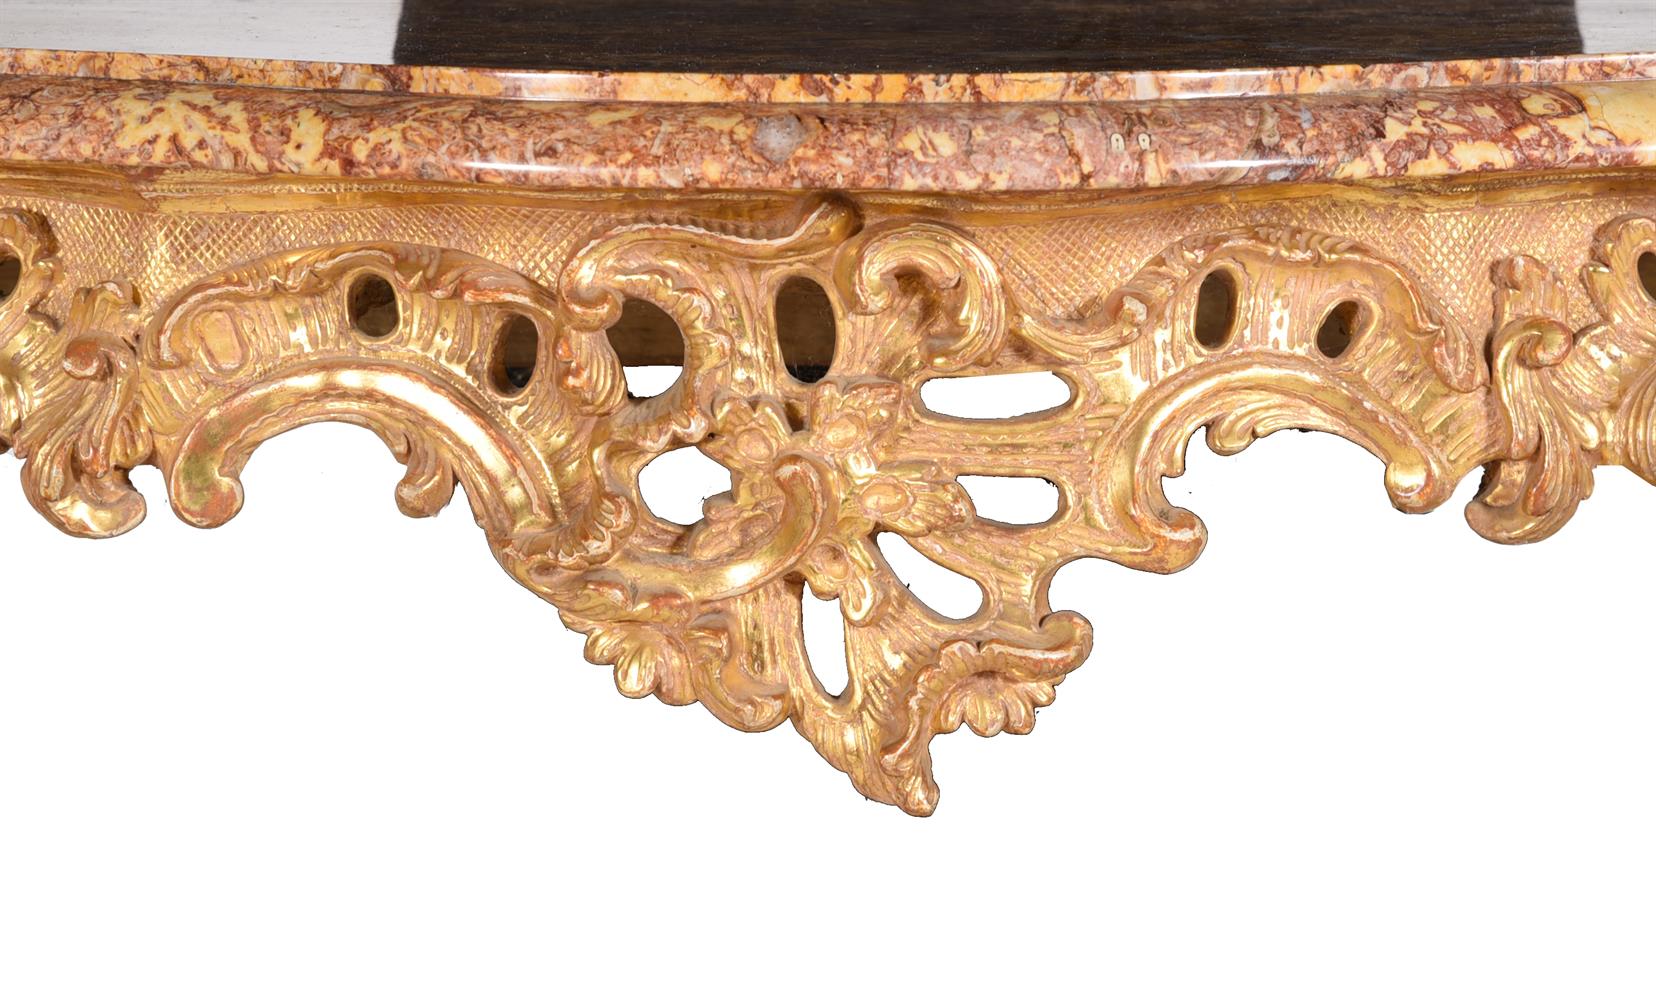 A PAIR OF LOUIS XV CARVED GILTWOOD CONSOLE TABLES, MID 18TH CENTURY - Image 8 of 10